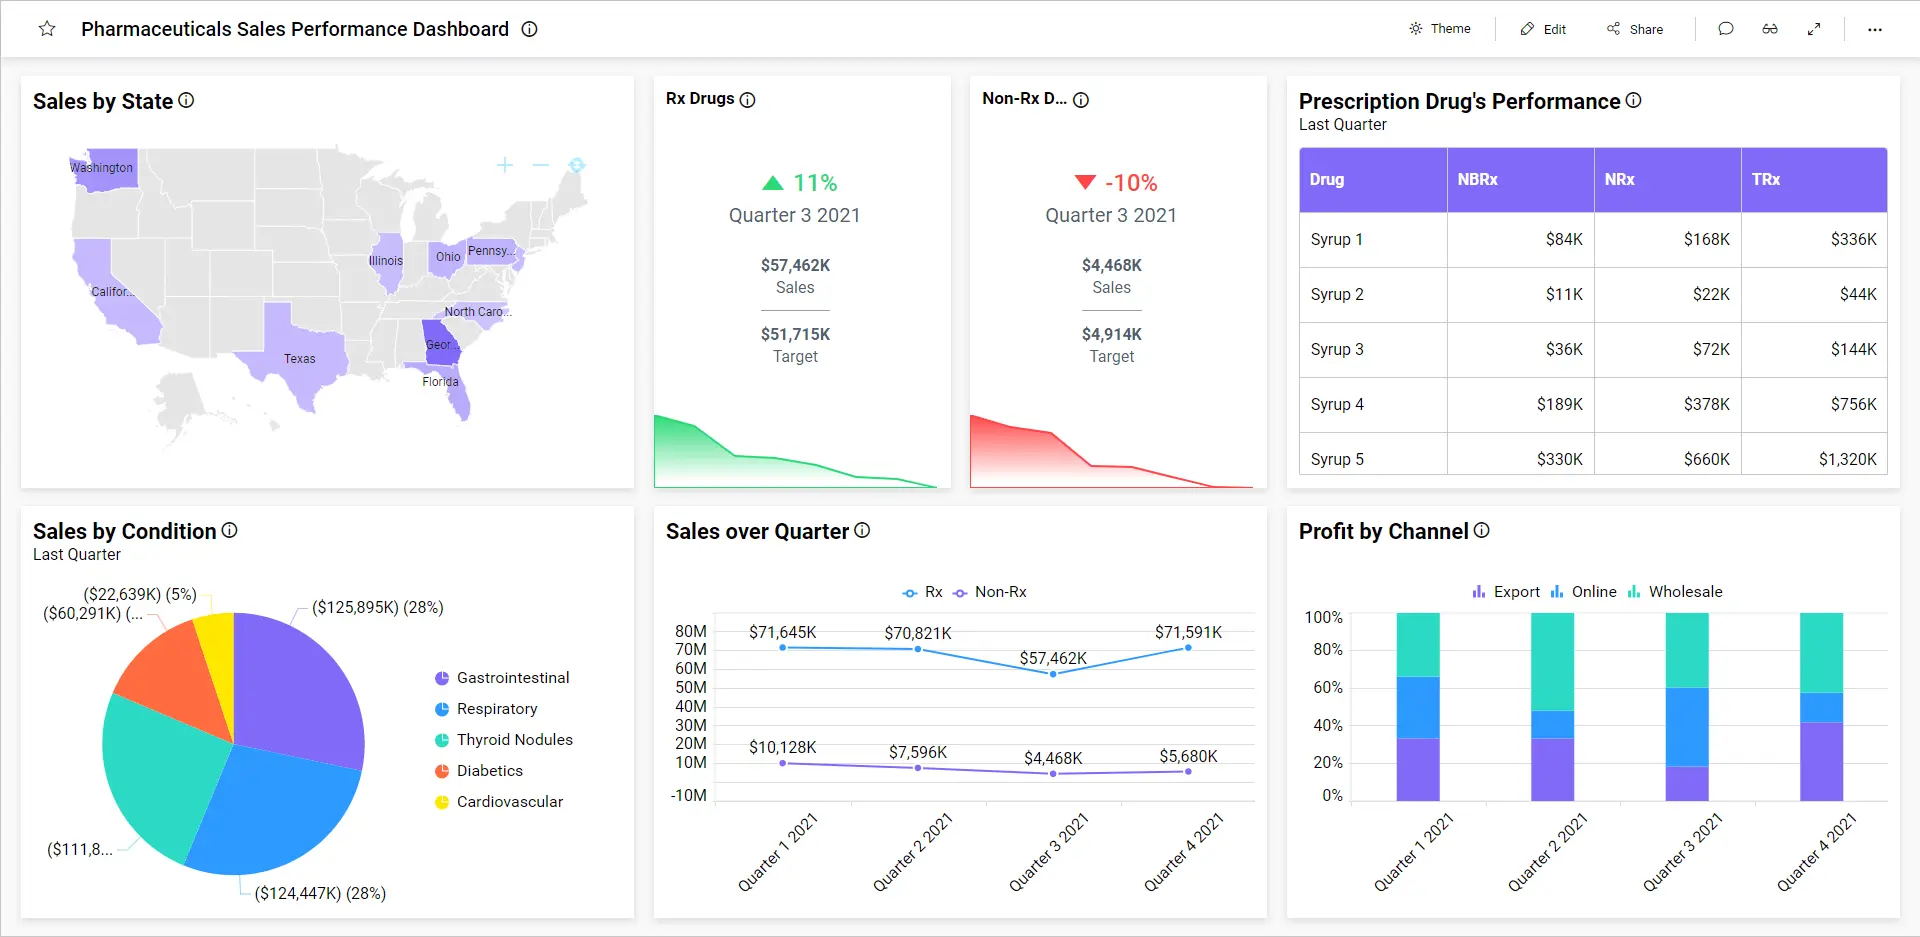 Automated Reporting vs. BI: Pharmaceutical Sales Performance Dashboard